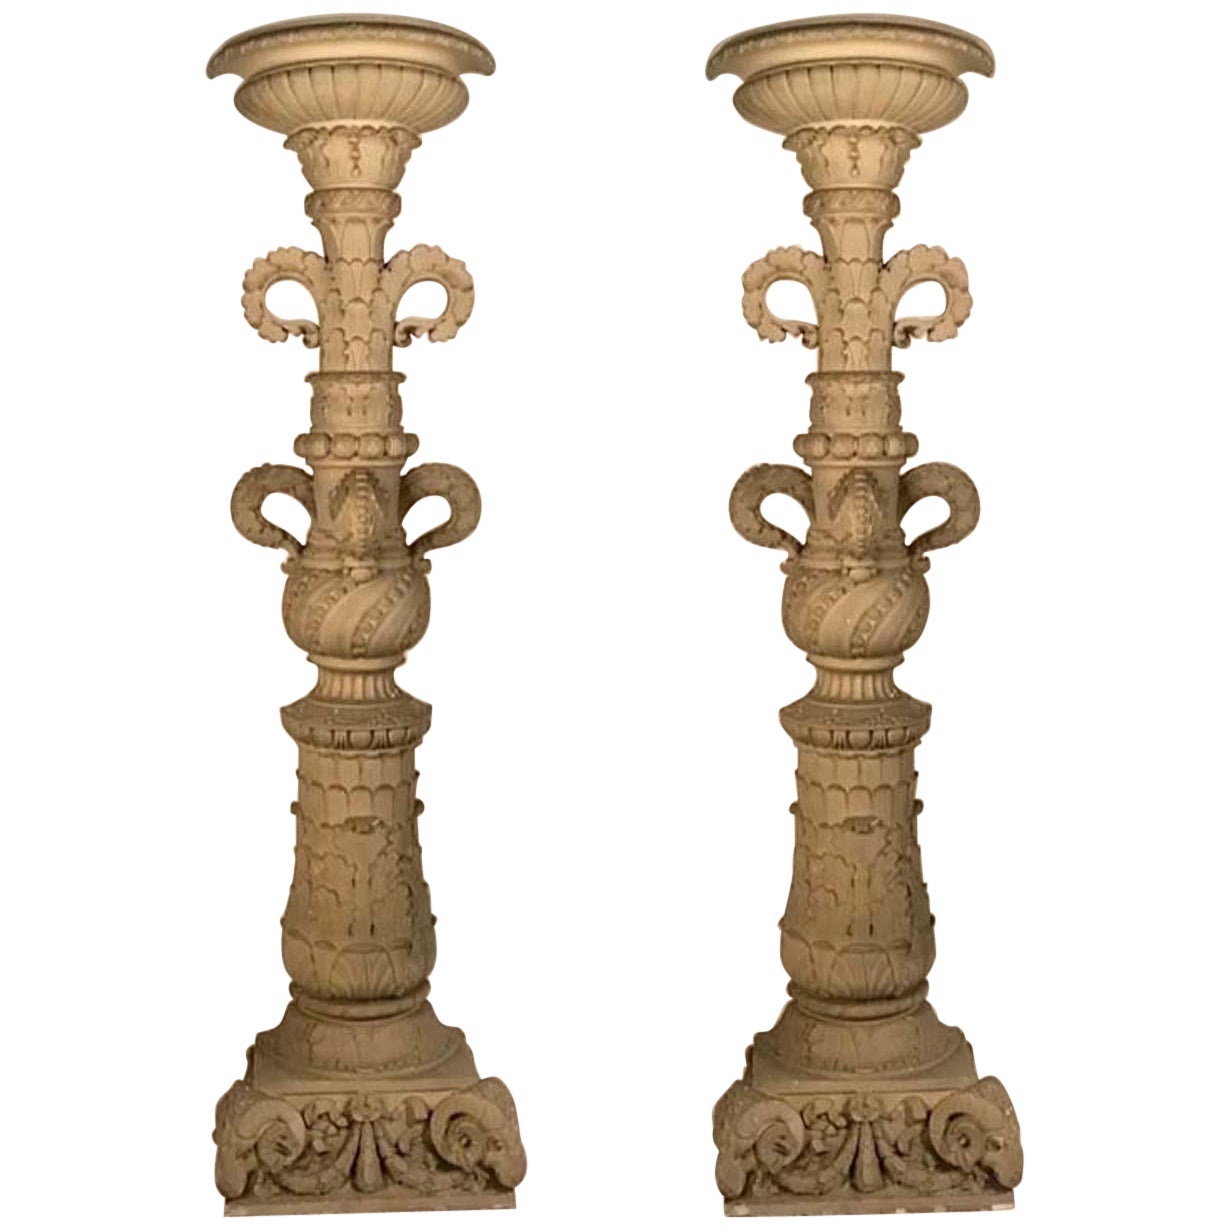 A  Pair of Theatrical Carved Pilasters  Fancifully Moulded and Hand Finished